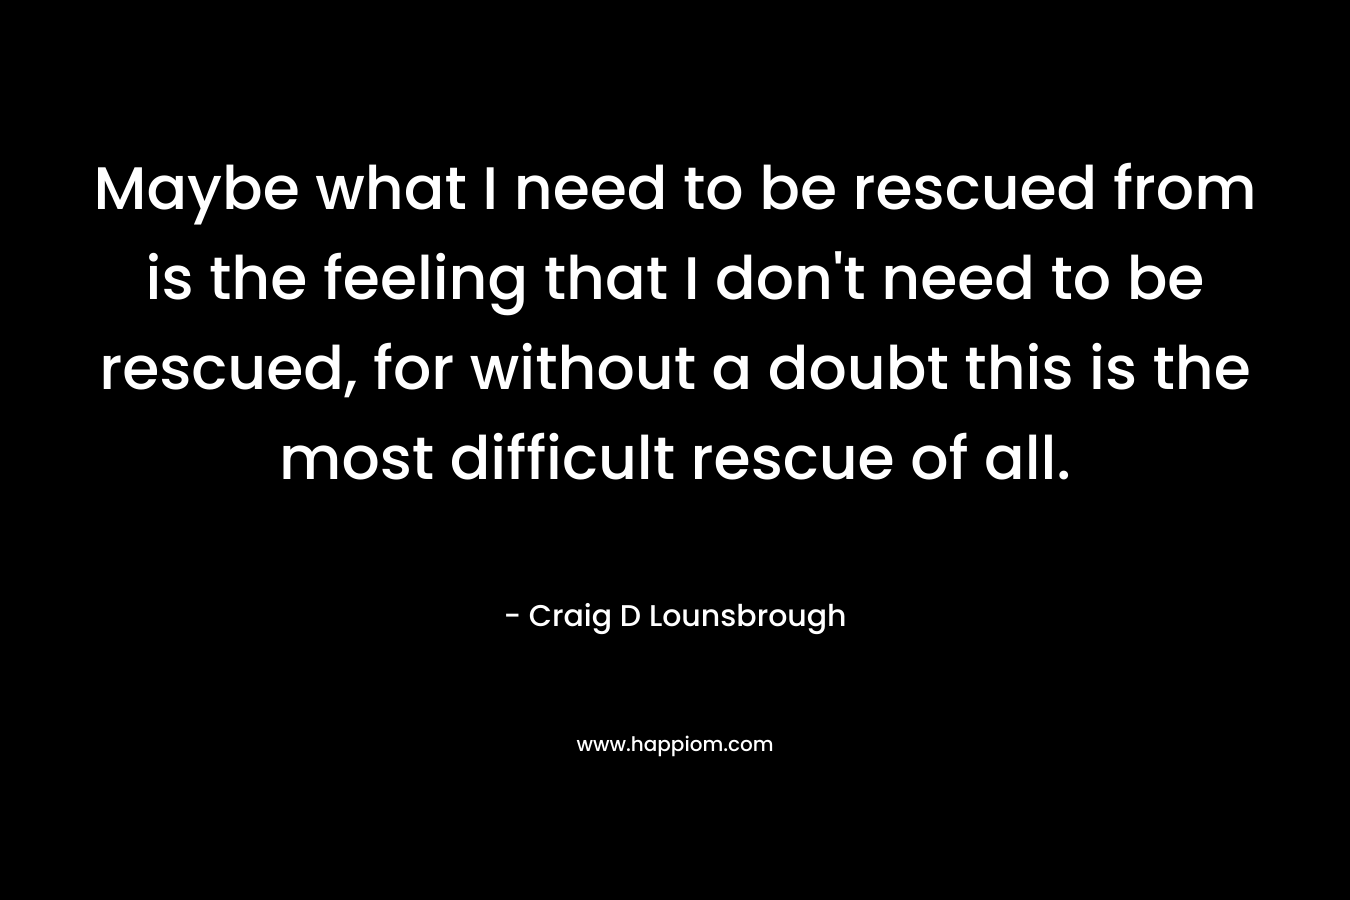 Maybe what I need to be rescued from is the feeling that I don't need to be rescued, for without a doubt this is the most difficult rescue of all.